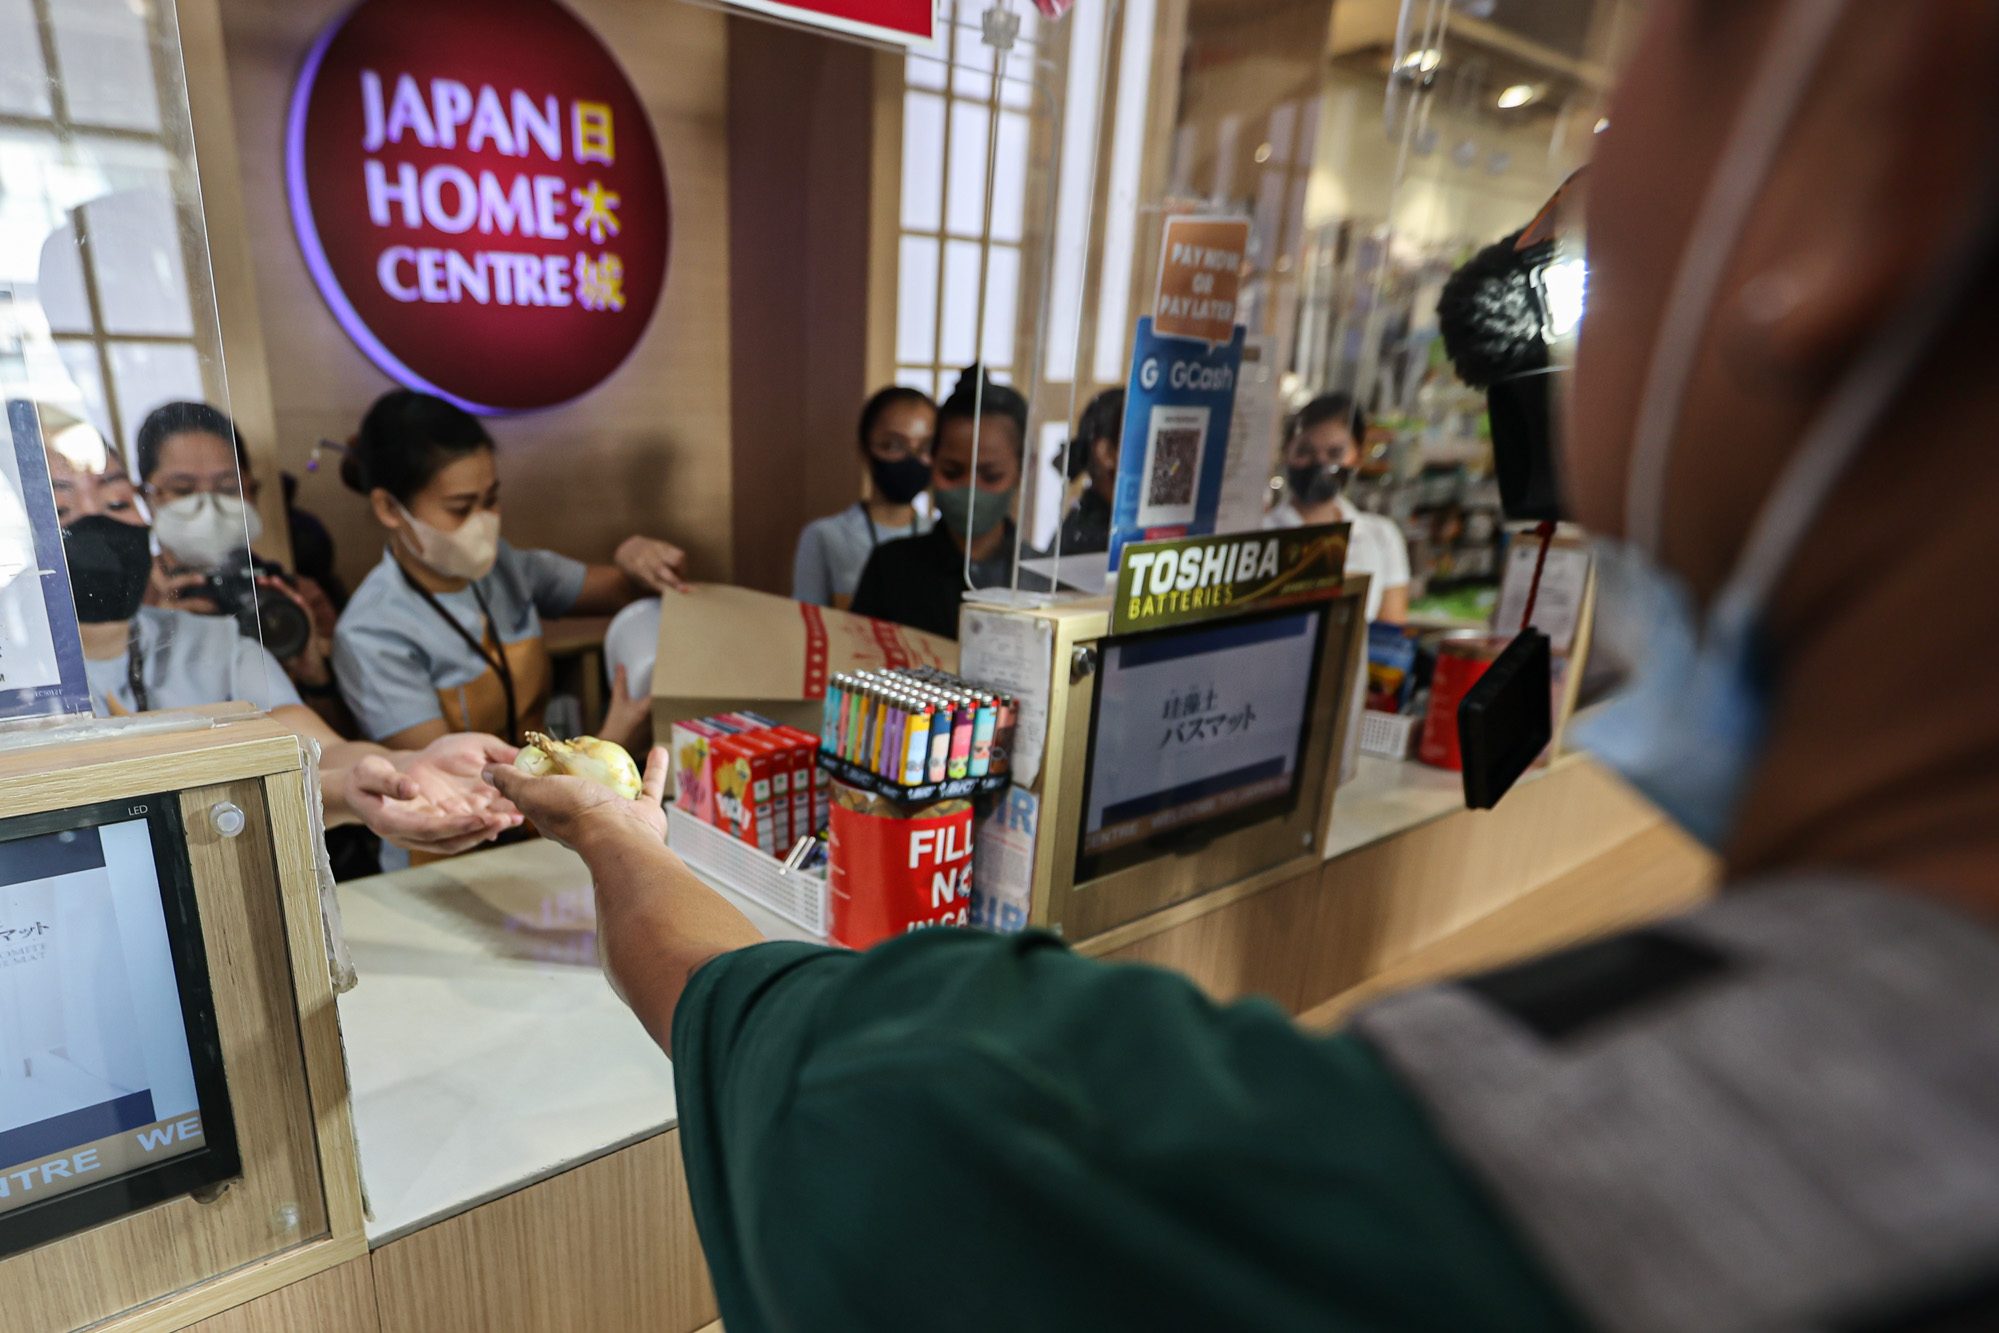 LOOK: Customers eager to pay with onions at Japan Home Centre